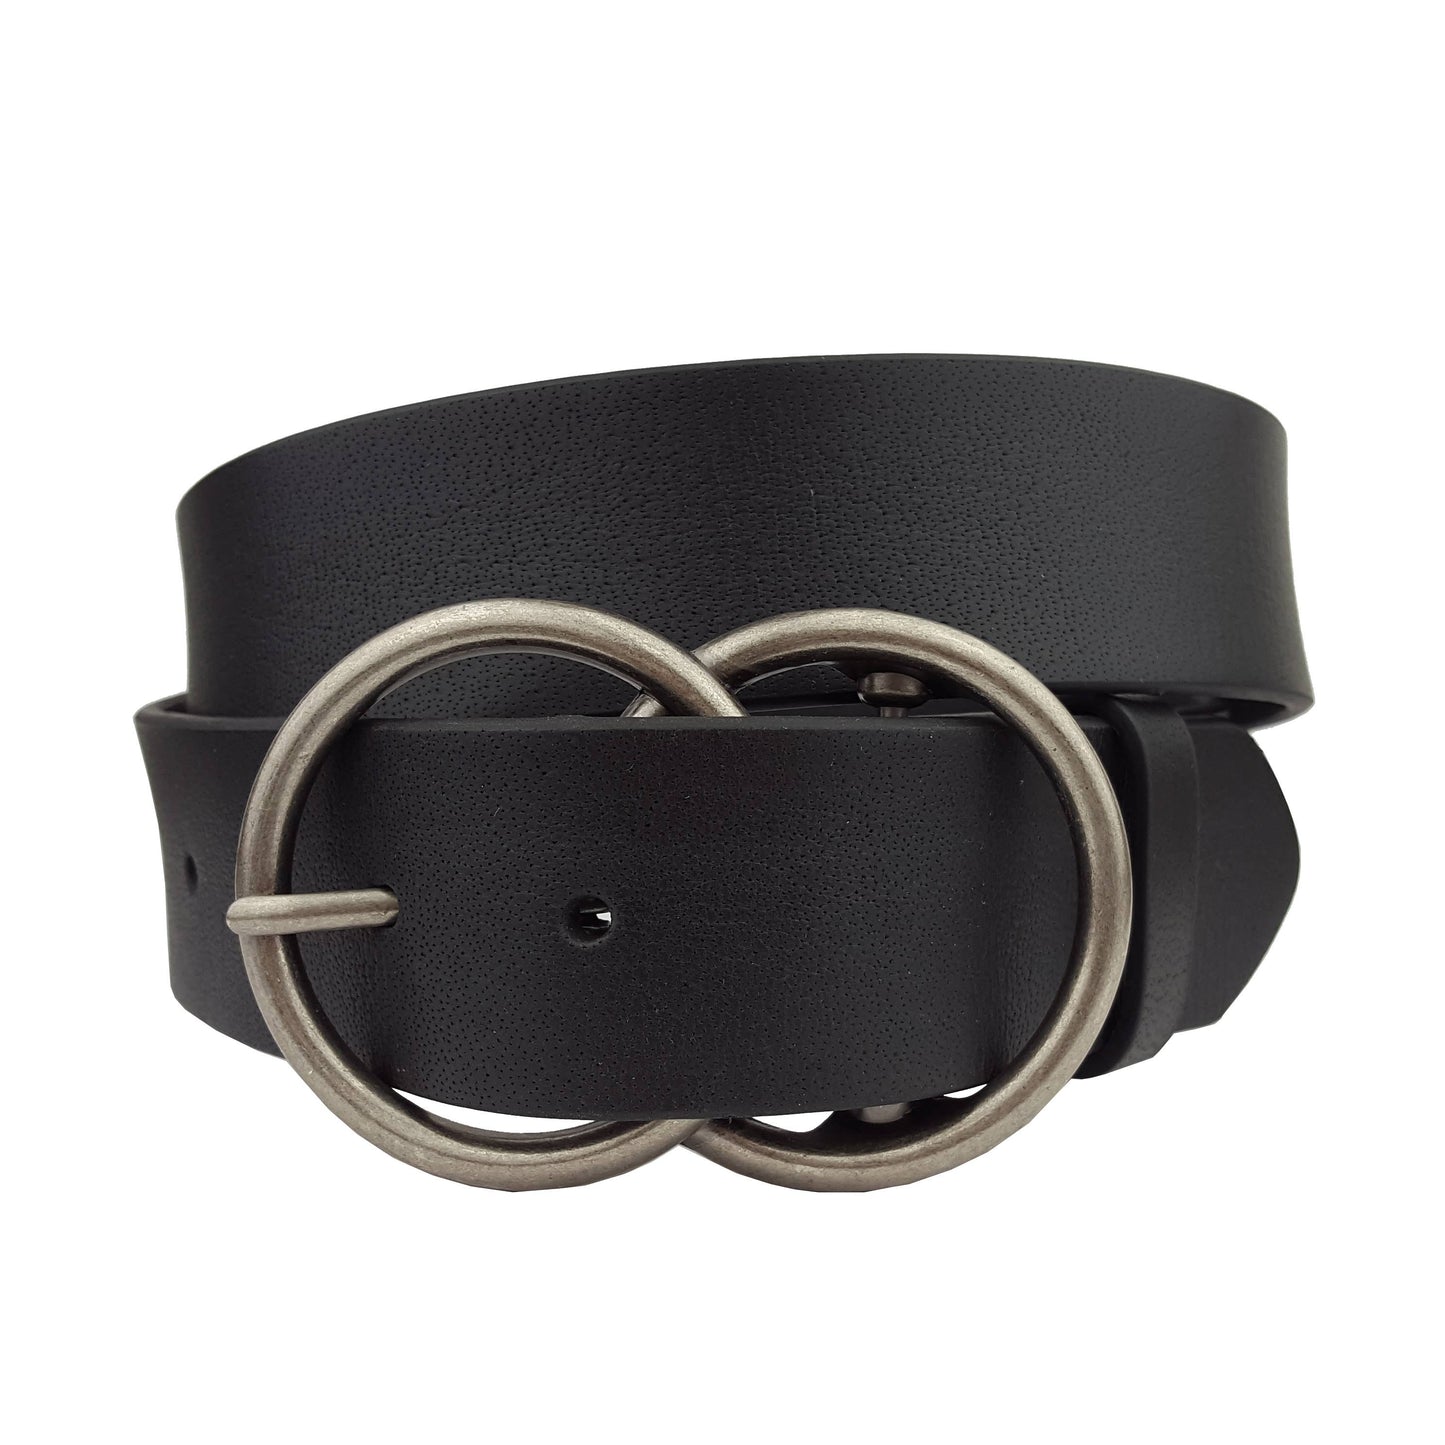 Genuine Leather belt w. Double Ring Design Buckle